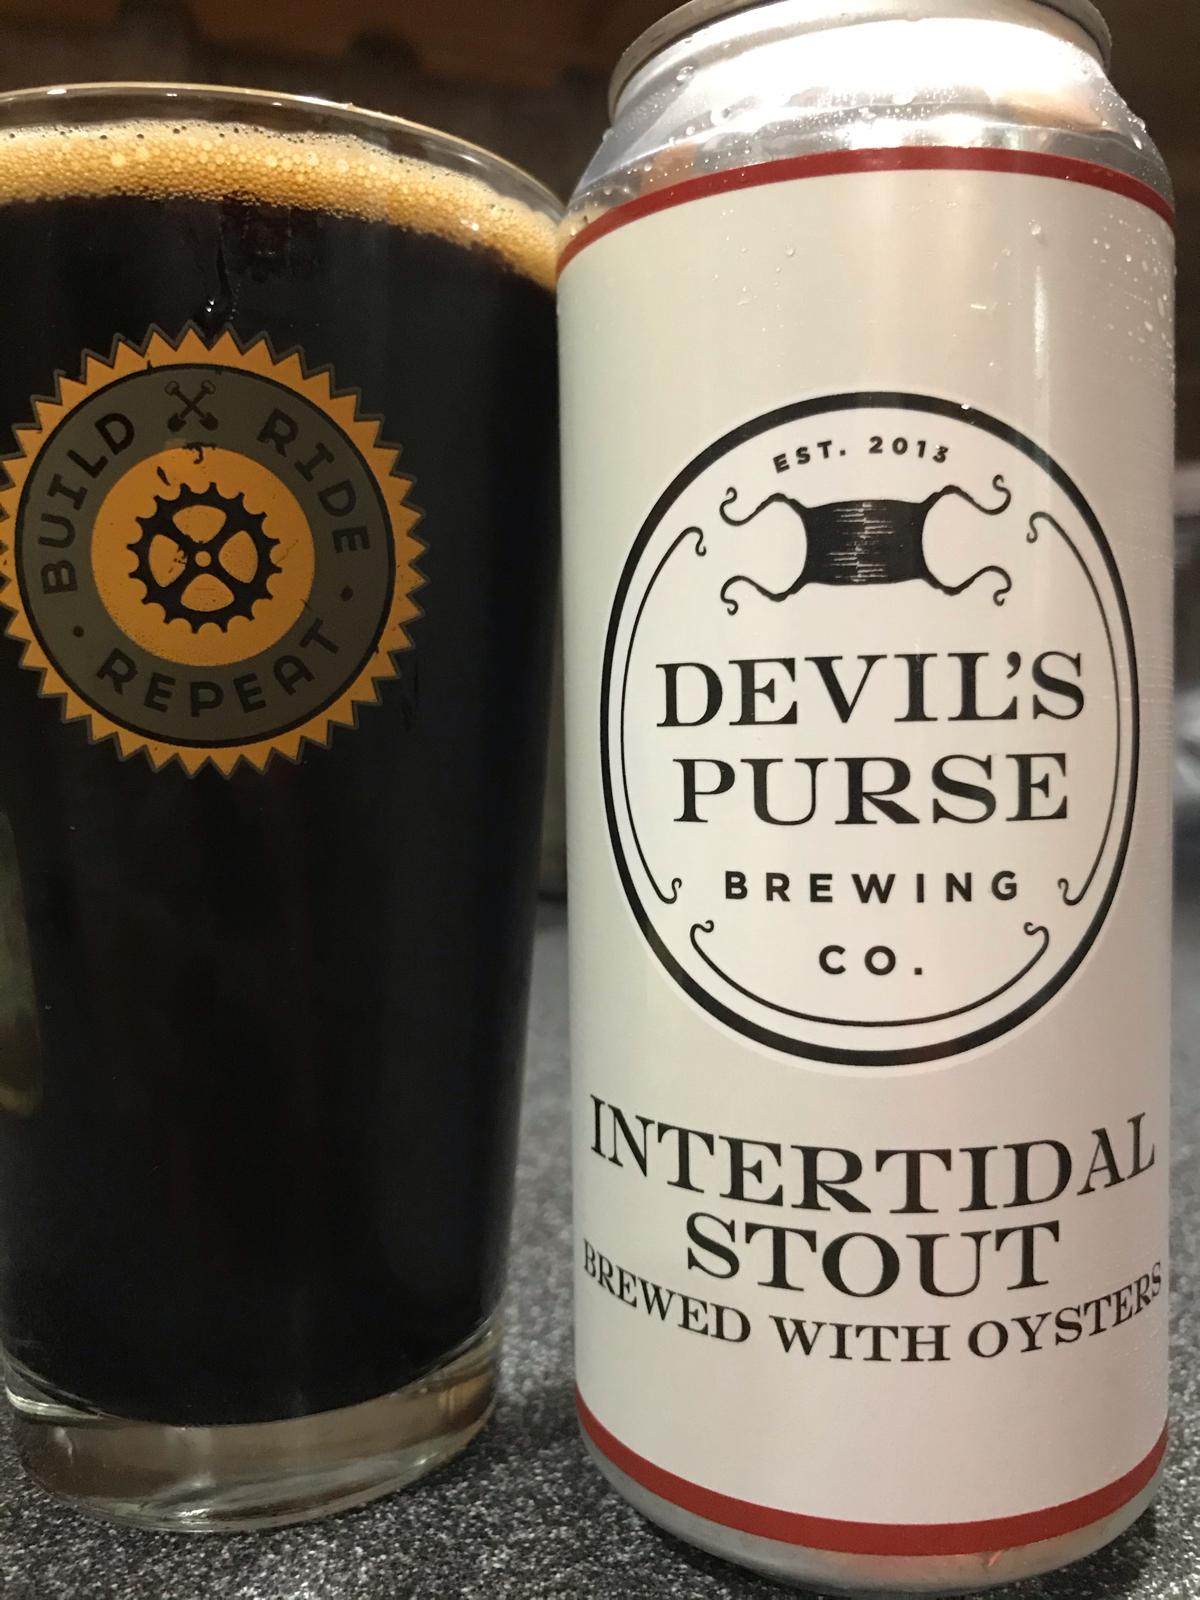 Intertidal Oyster Stout